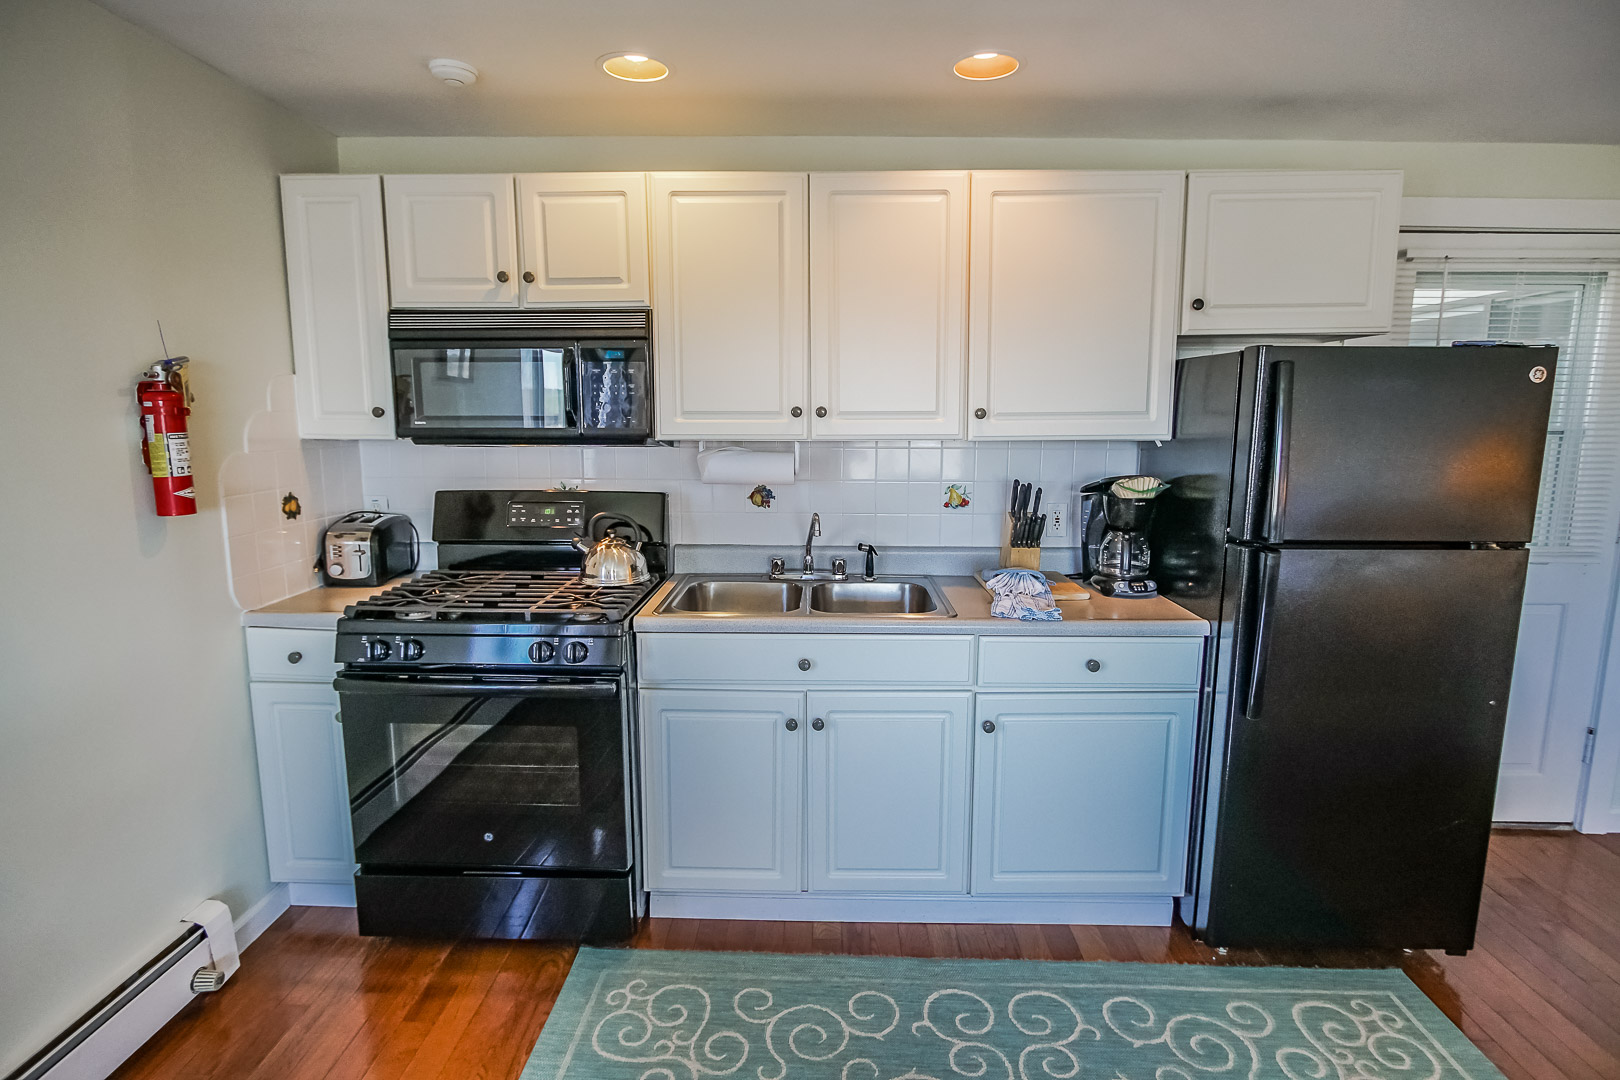 A traditional Kitchenette at VRI's Neptune House Resort in Rhode Island.